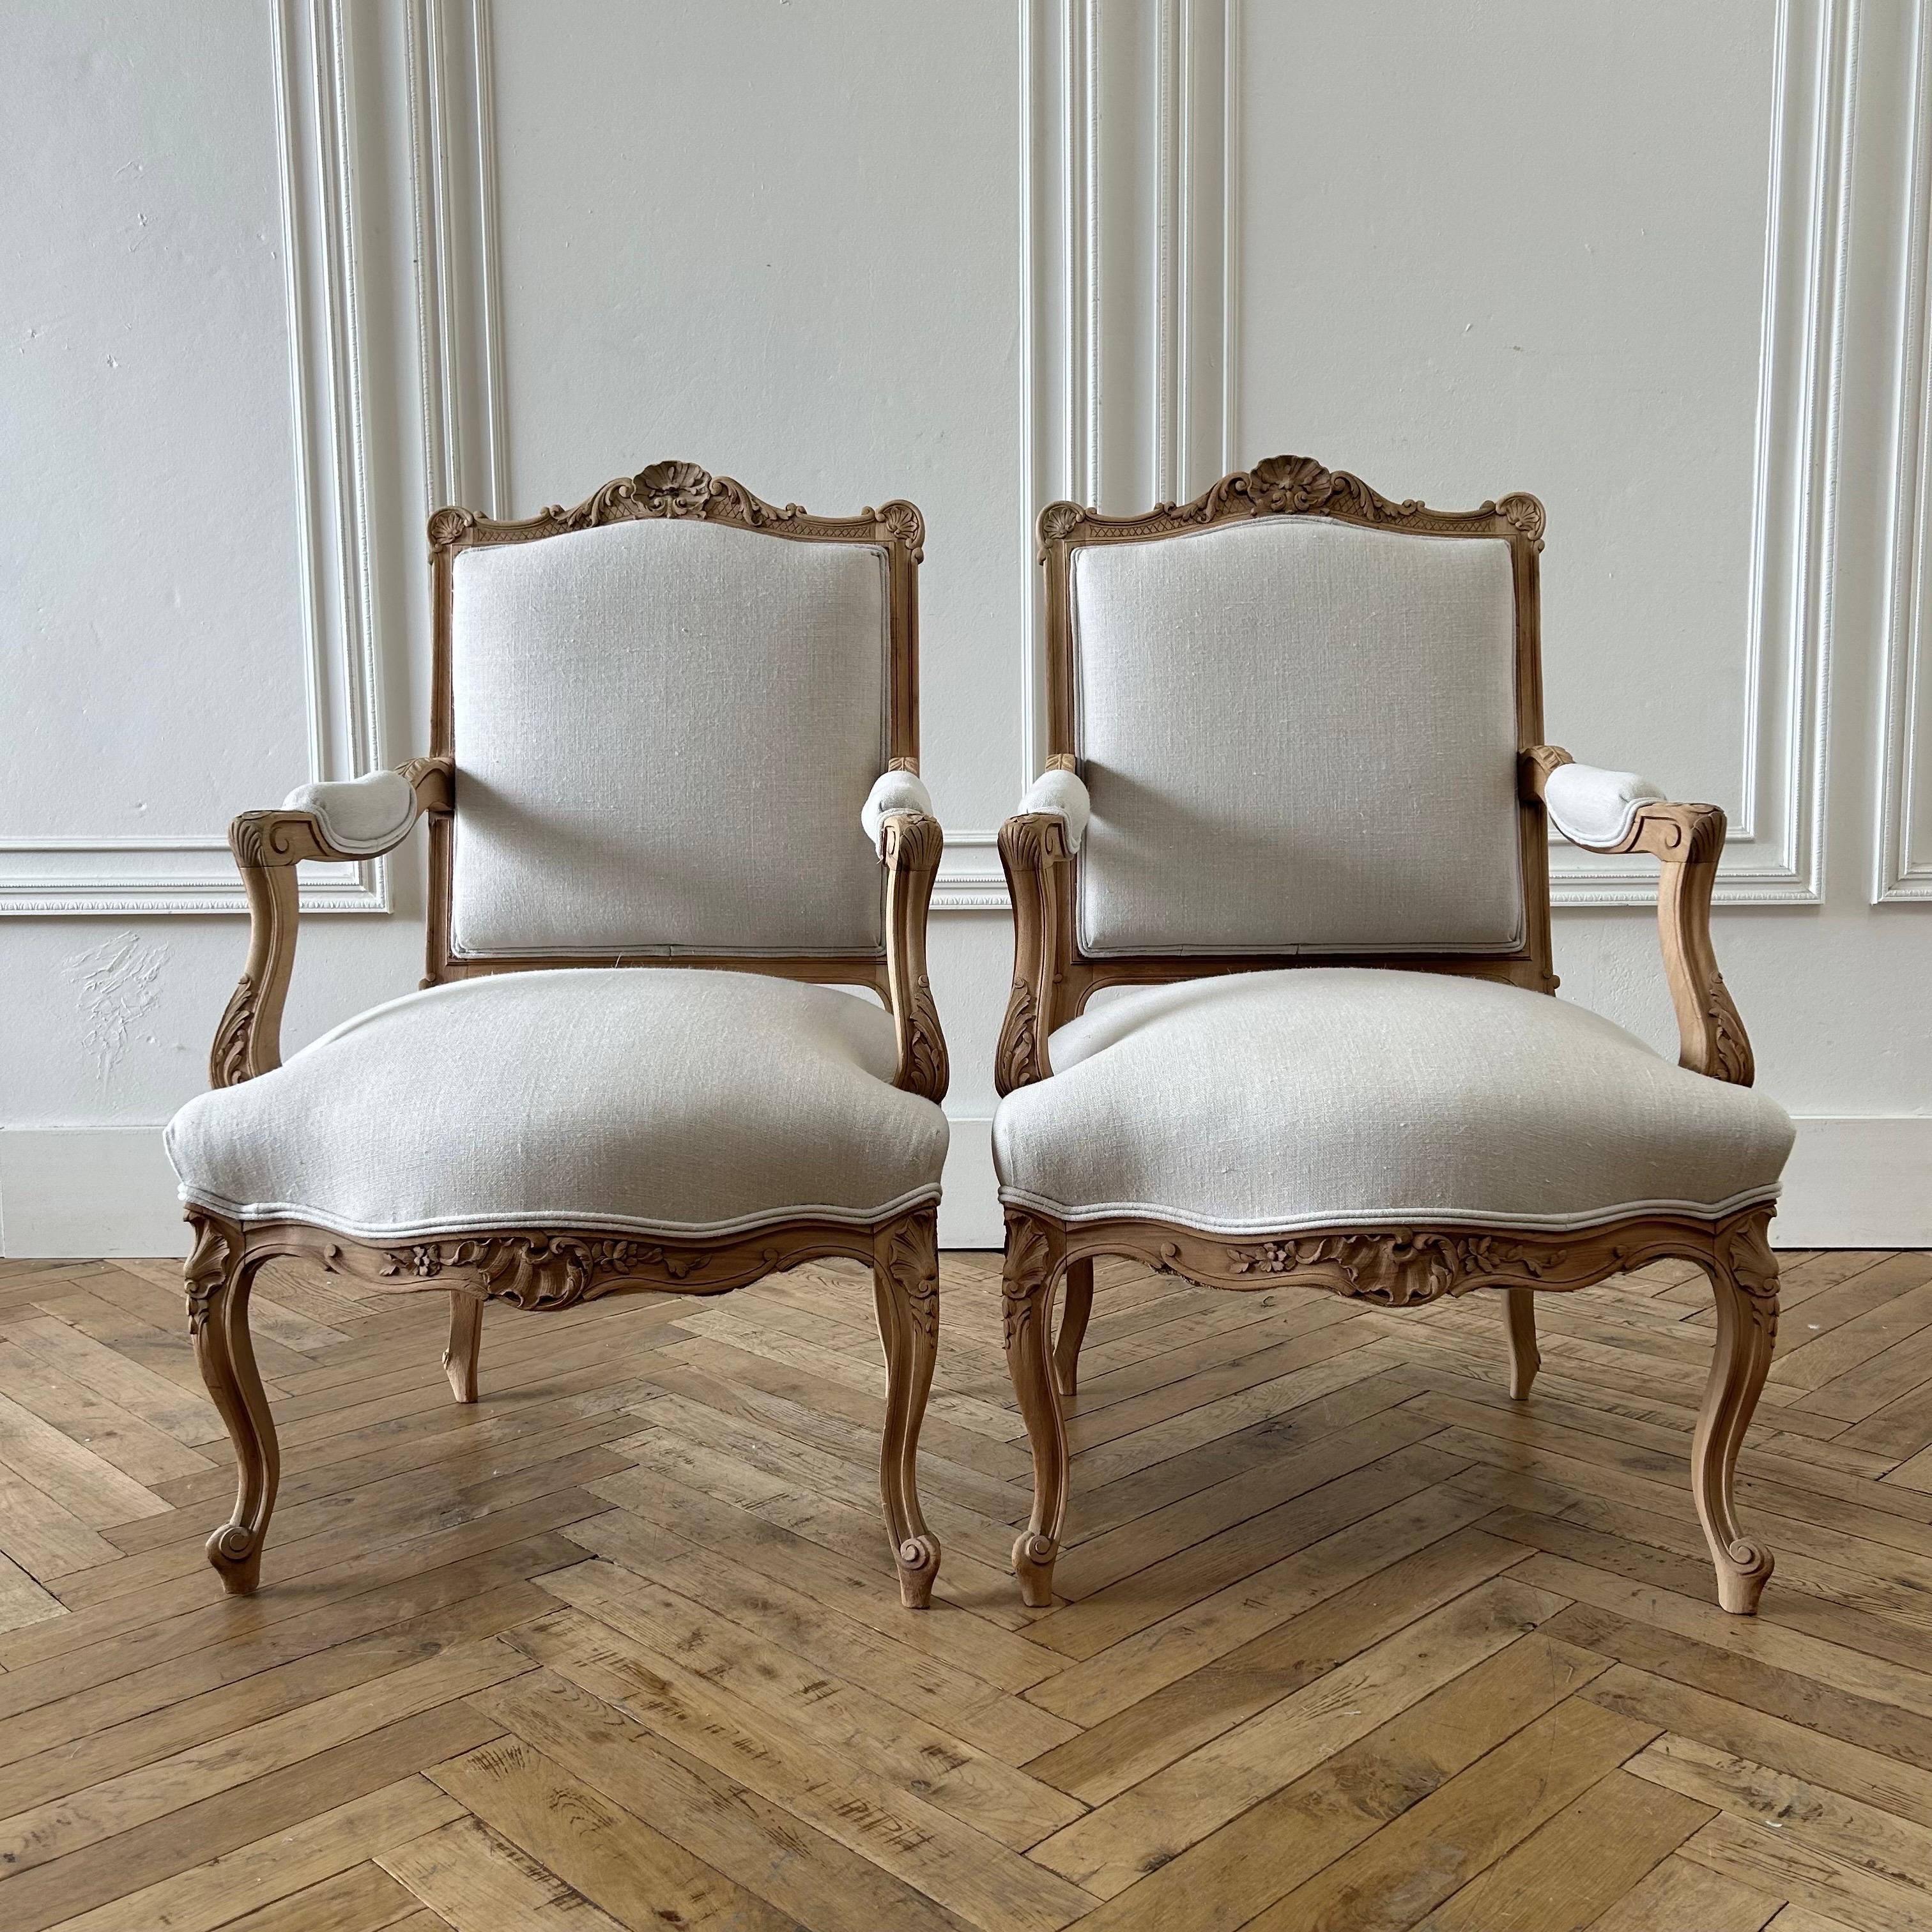 Pair of vintage French Louis XV style open arm chairs
The walnut frame has a bleached raw finish, making these very organic with a vintage appeal.
The upholstery is 100% Libeco Natural Linen in Oatmeal. Finished with a double welt edge. 
Size: